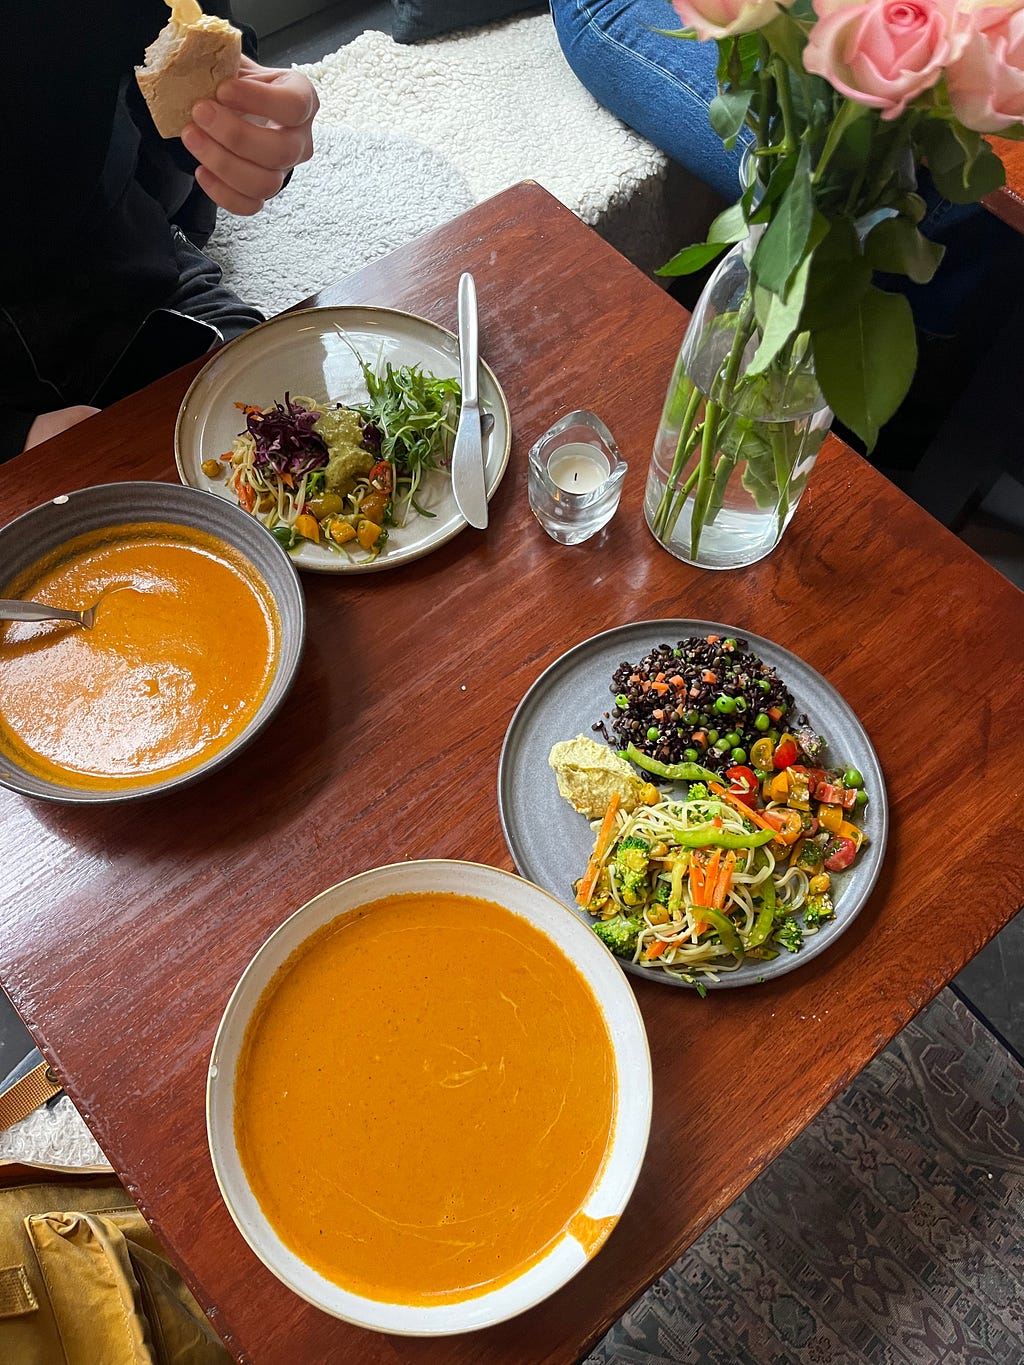 Photo displaying two bowls of tomato soup and two plates of fresh salad.